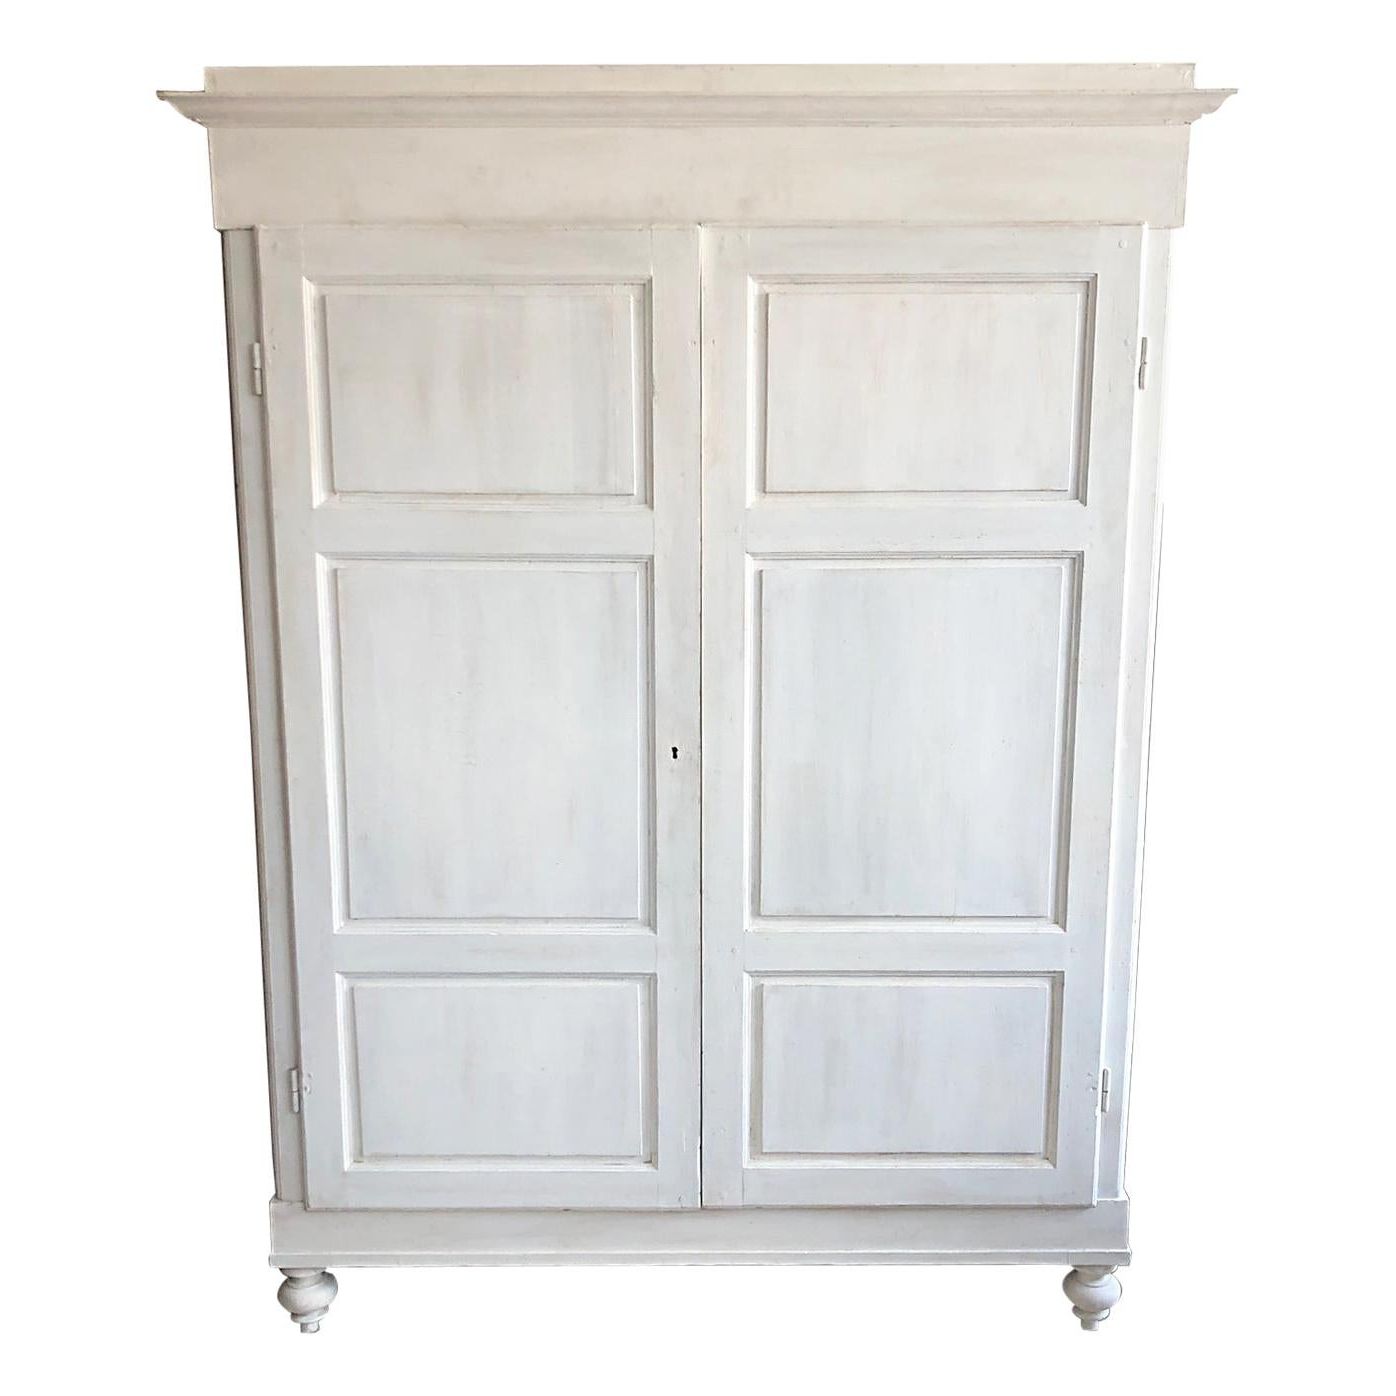 Shabby White Wardrobe, Original Italian Two Internal Drawers For Sale At  1stdibs Pertaining To White Shabby Chic Wardrobes (View 7 of 20)